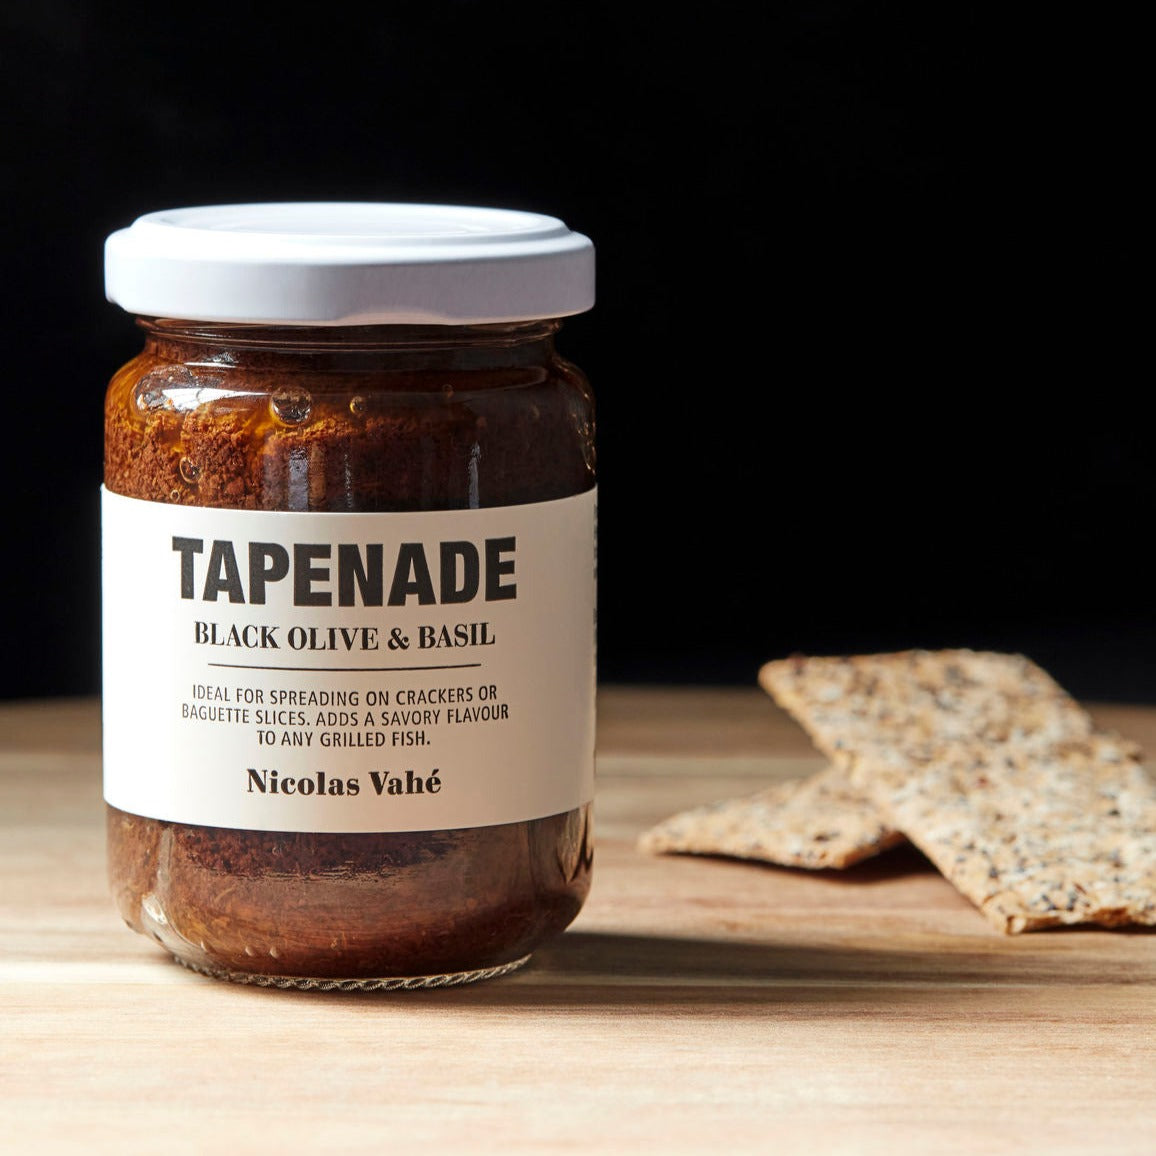 Tapenade with Black Olive & Basil